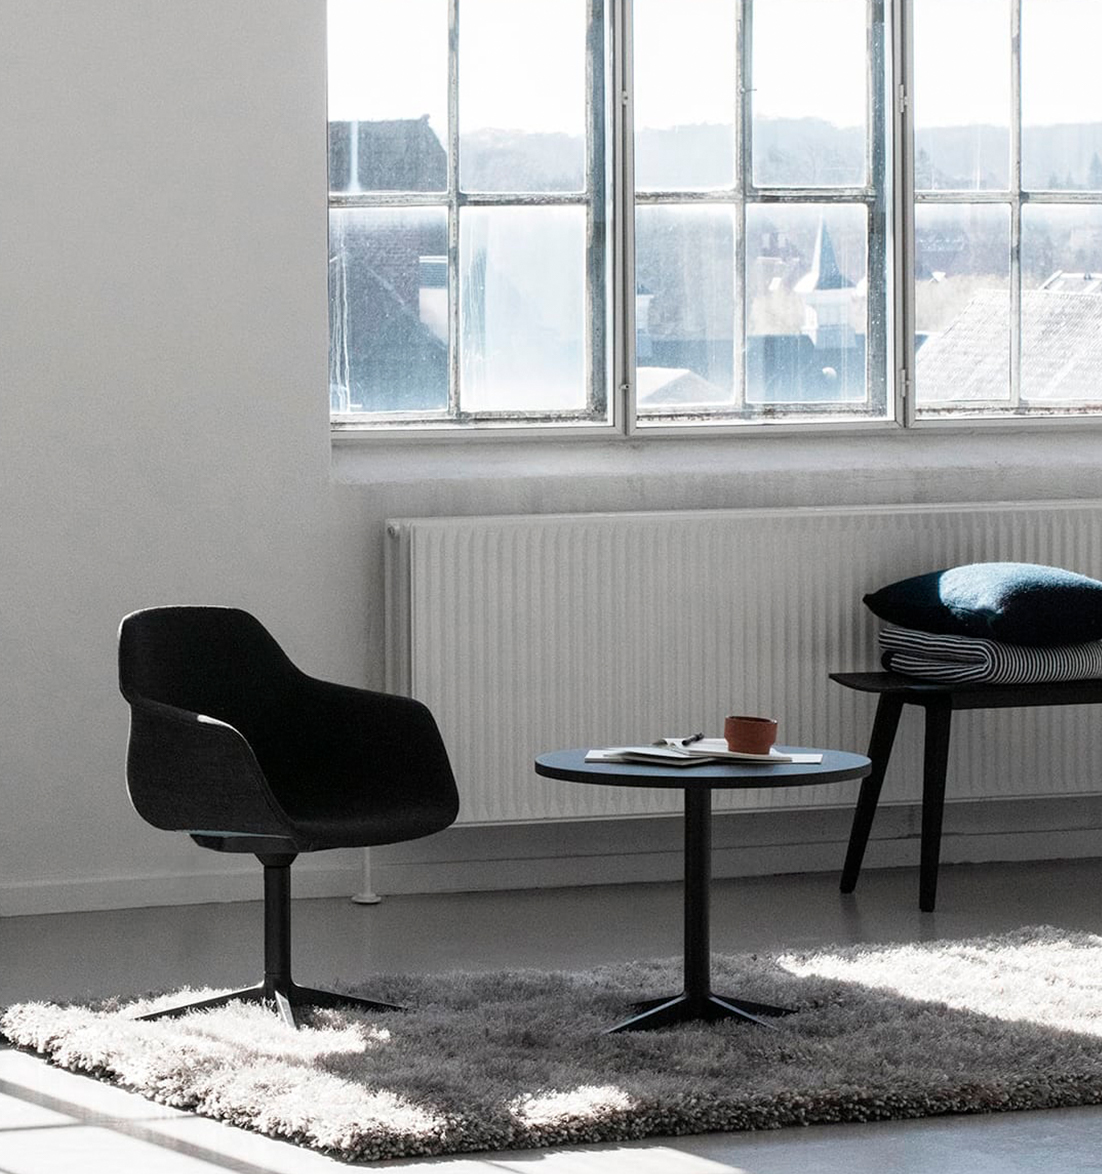 A black office desk chair in front of a window in a living room.